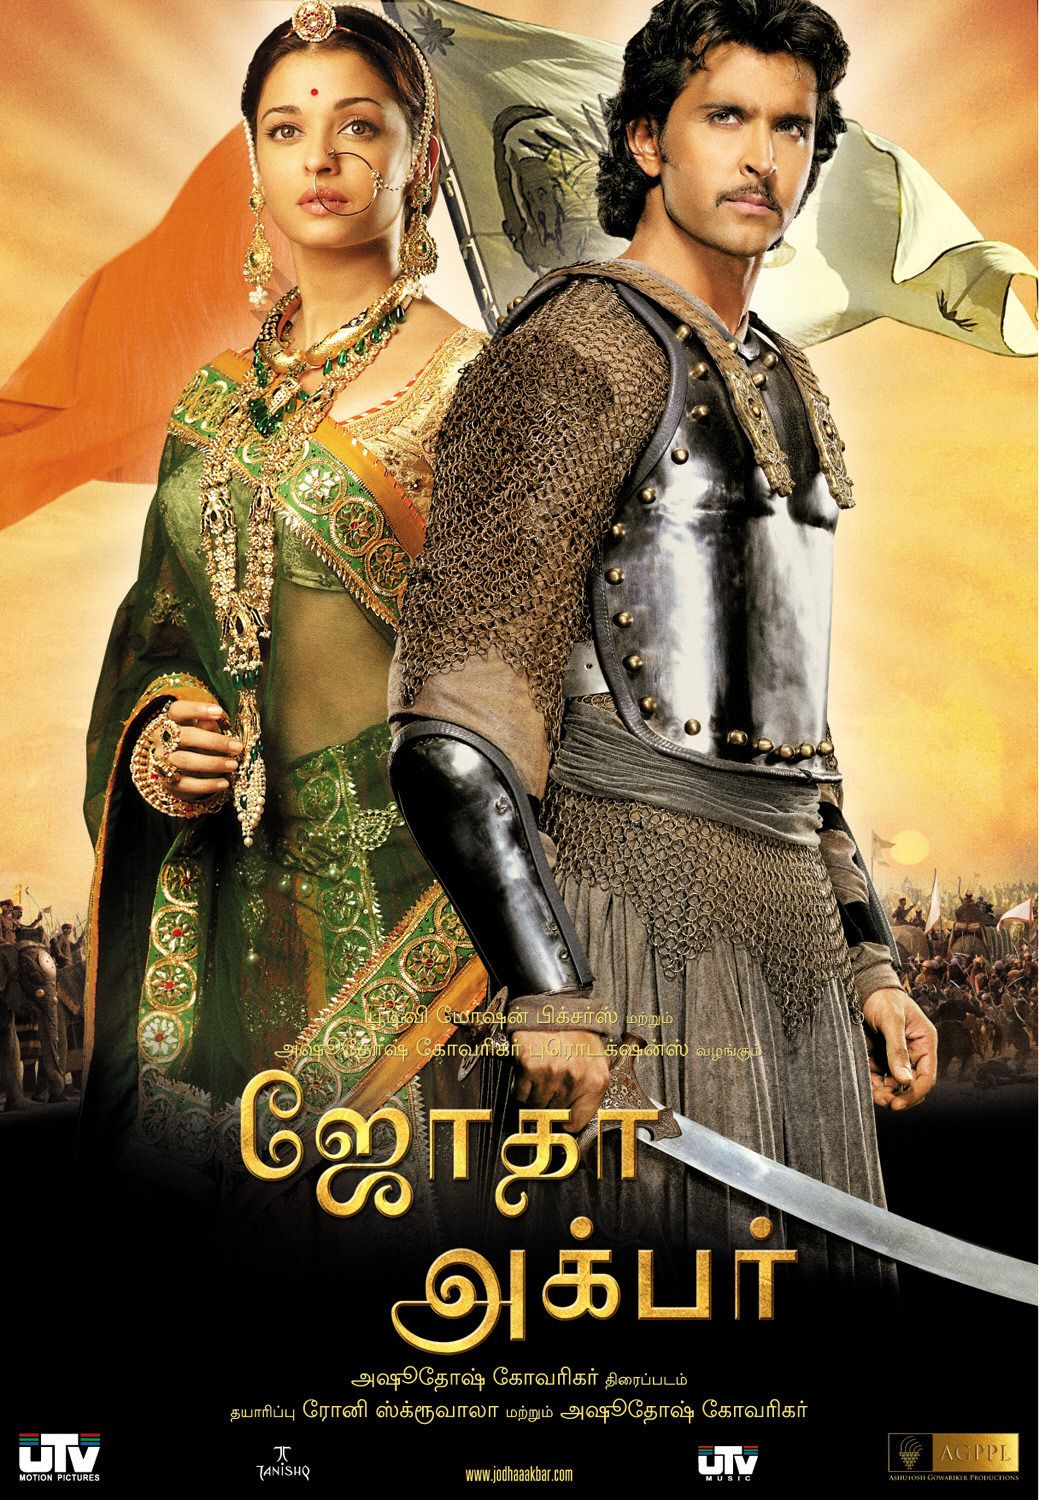 Extra Large Movie Poster Image for Jodhaa Akbar (#10 of 15)